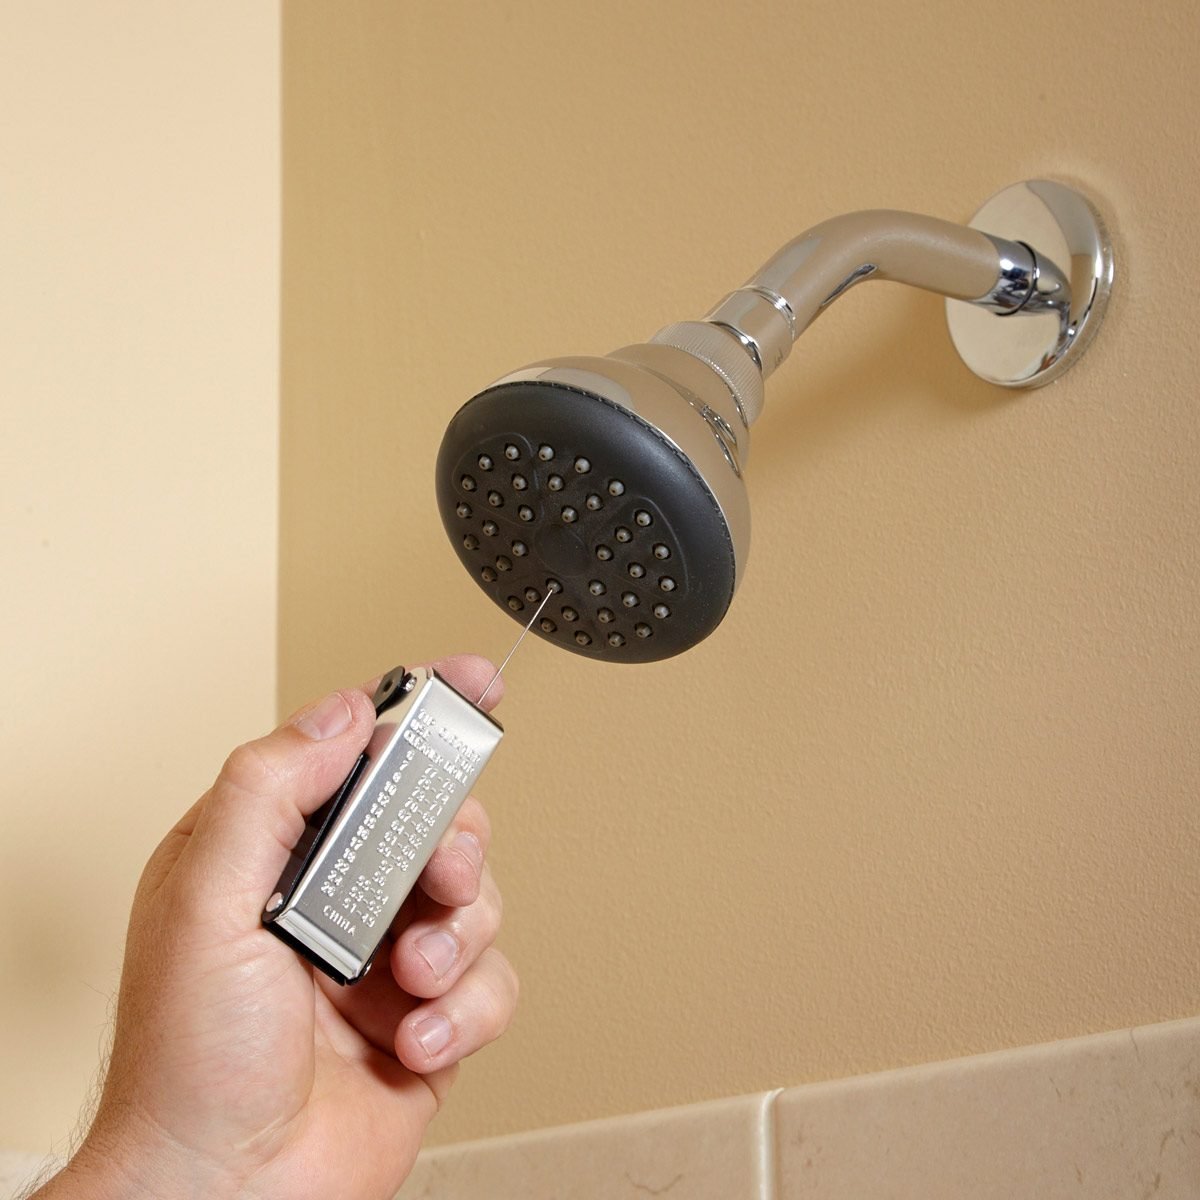 How to Clean Your Shower Head - Best Way to Clean Clogged Showerhead